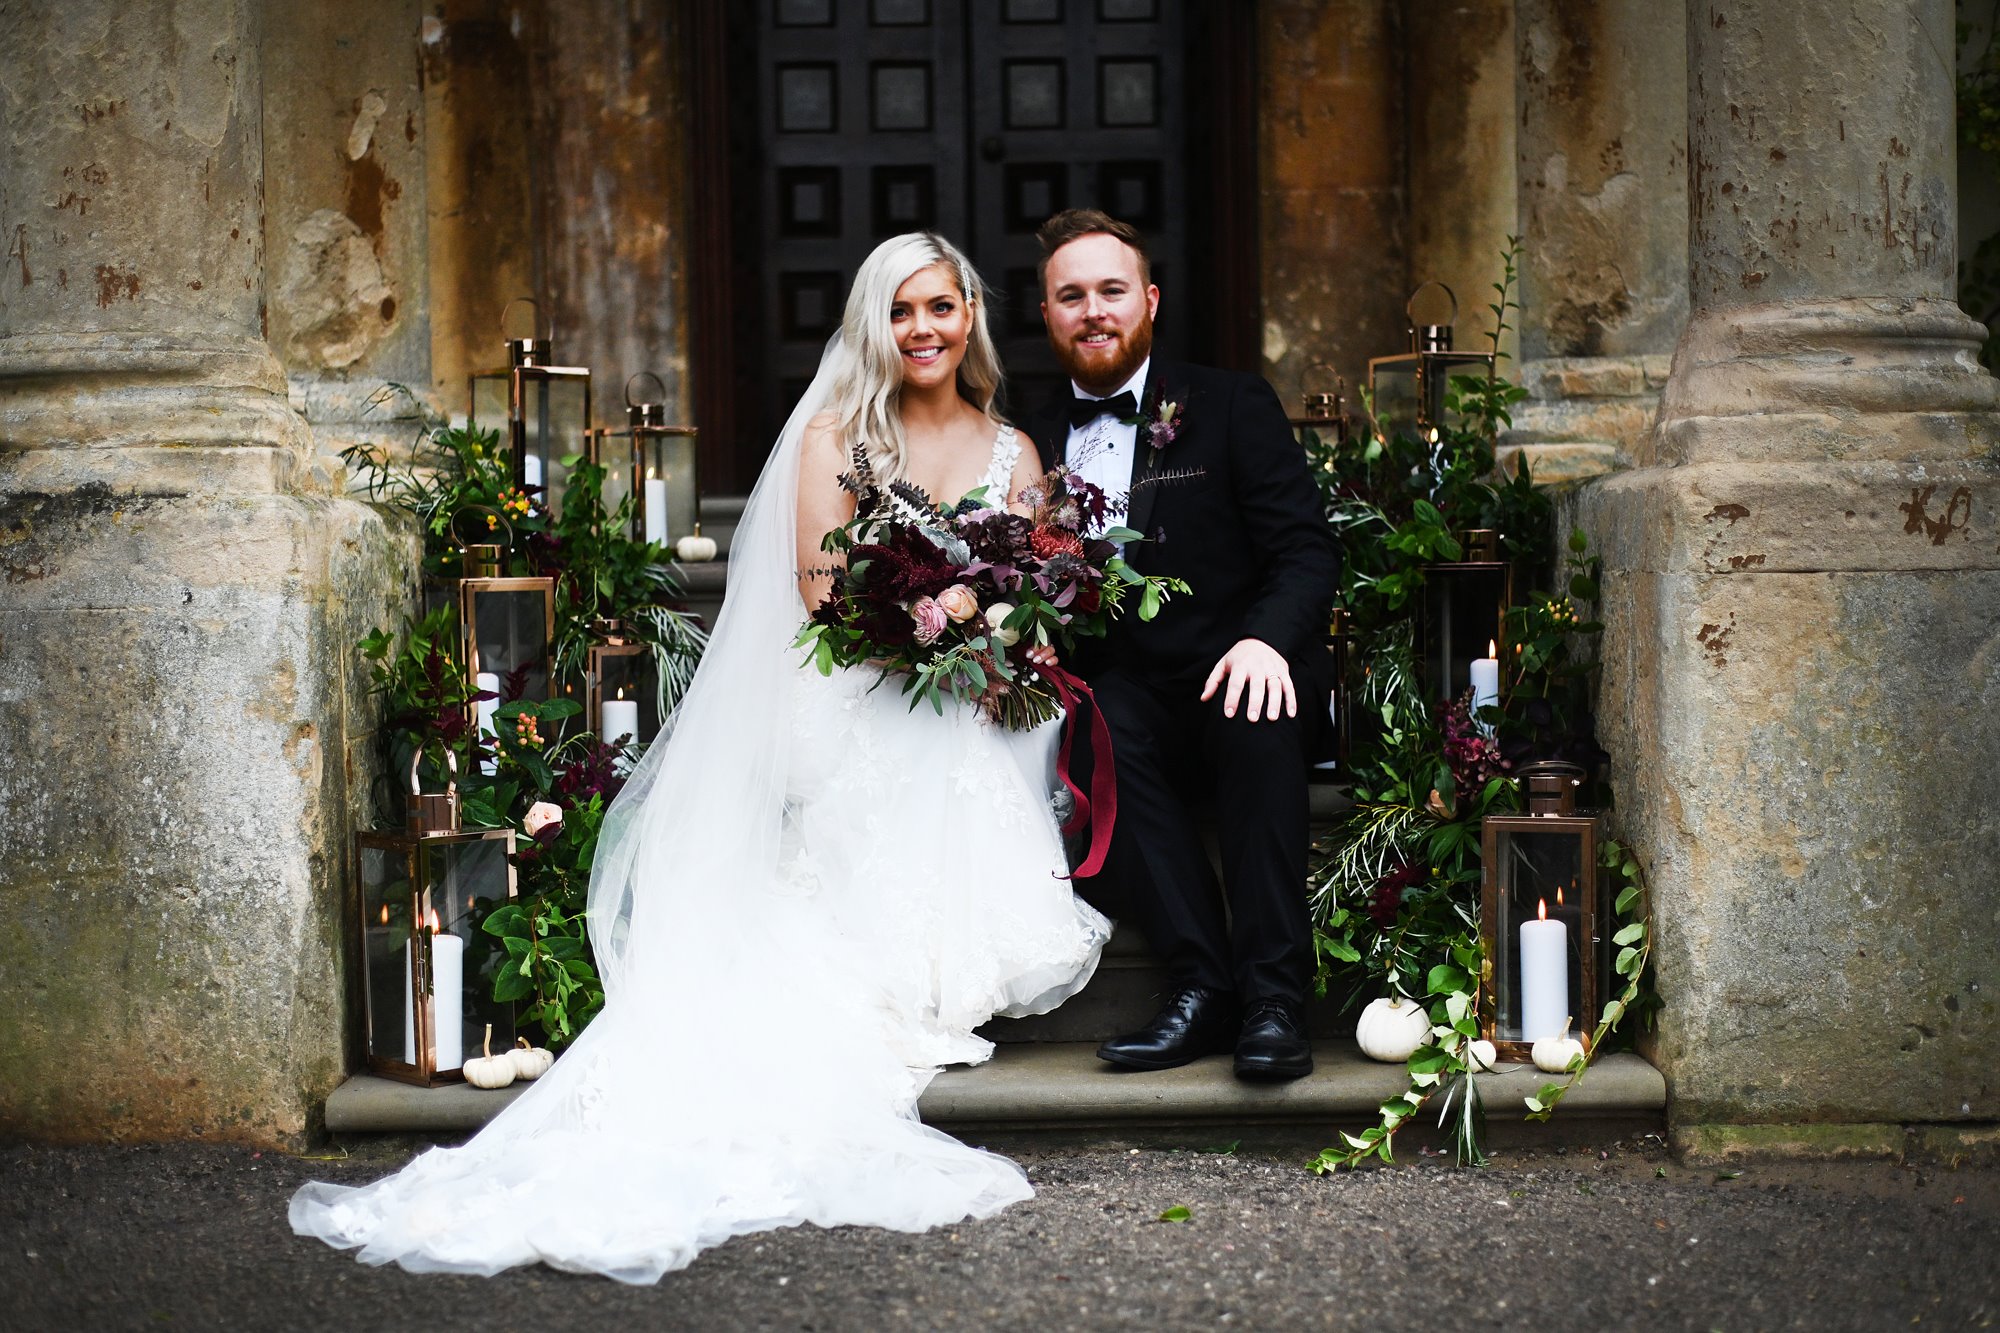 Bride and groom sit on the steps of their unusual mansion house wedding venue surrounded by rustic autumnal decor for their halloween wedding